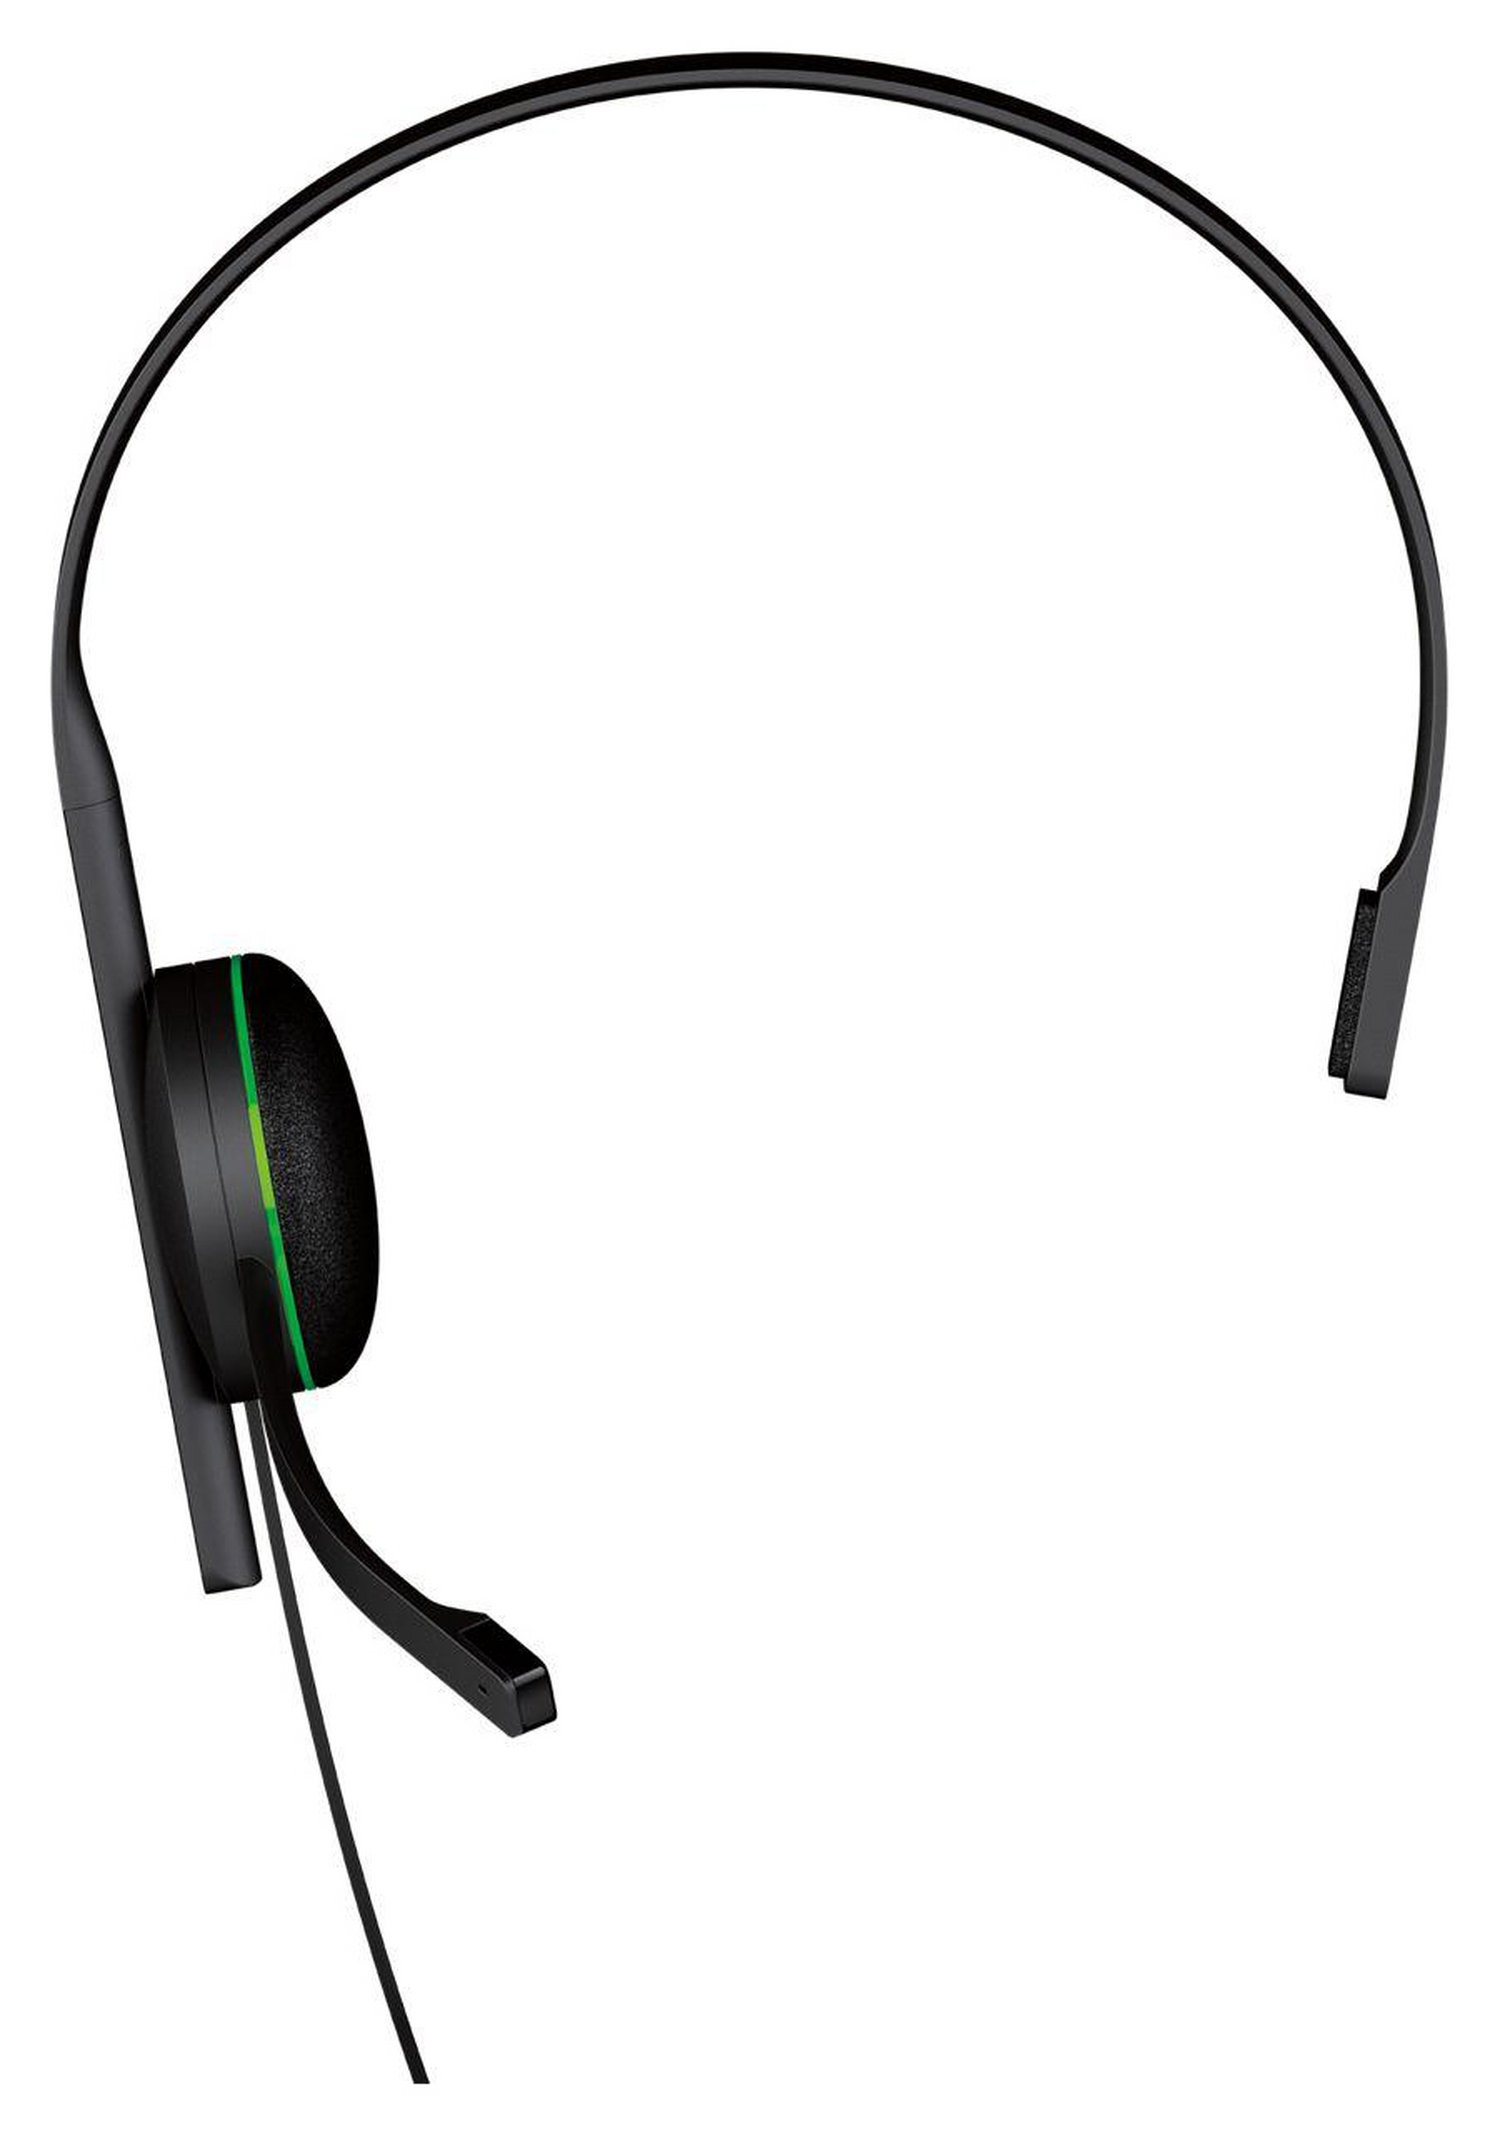 soft Xbox One Chat Headset Full View